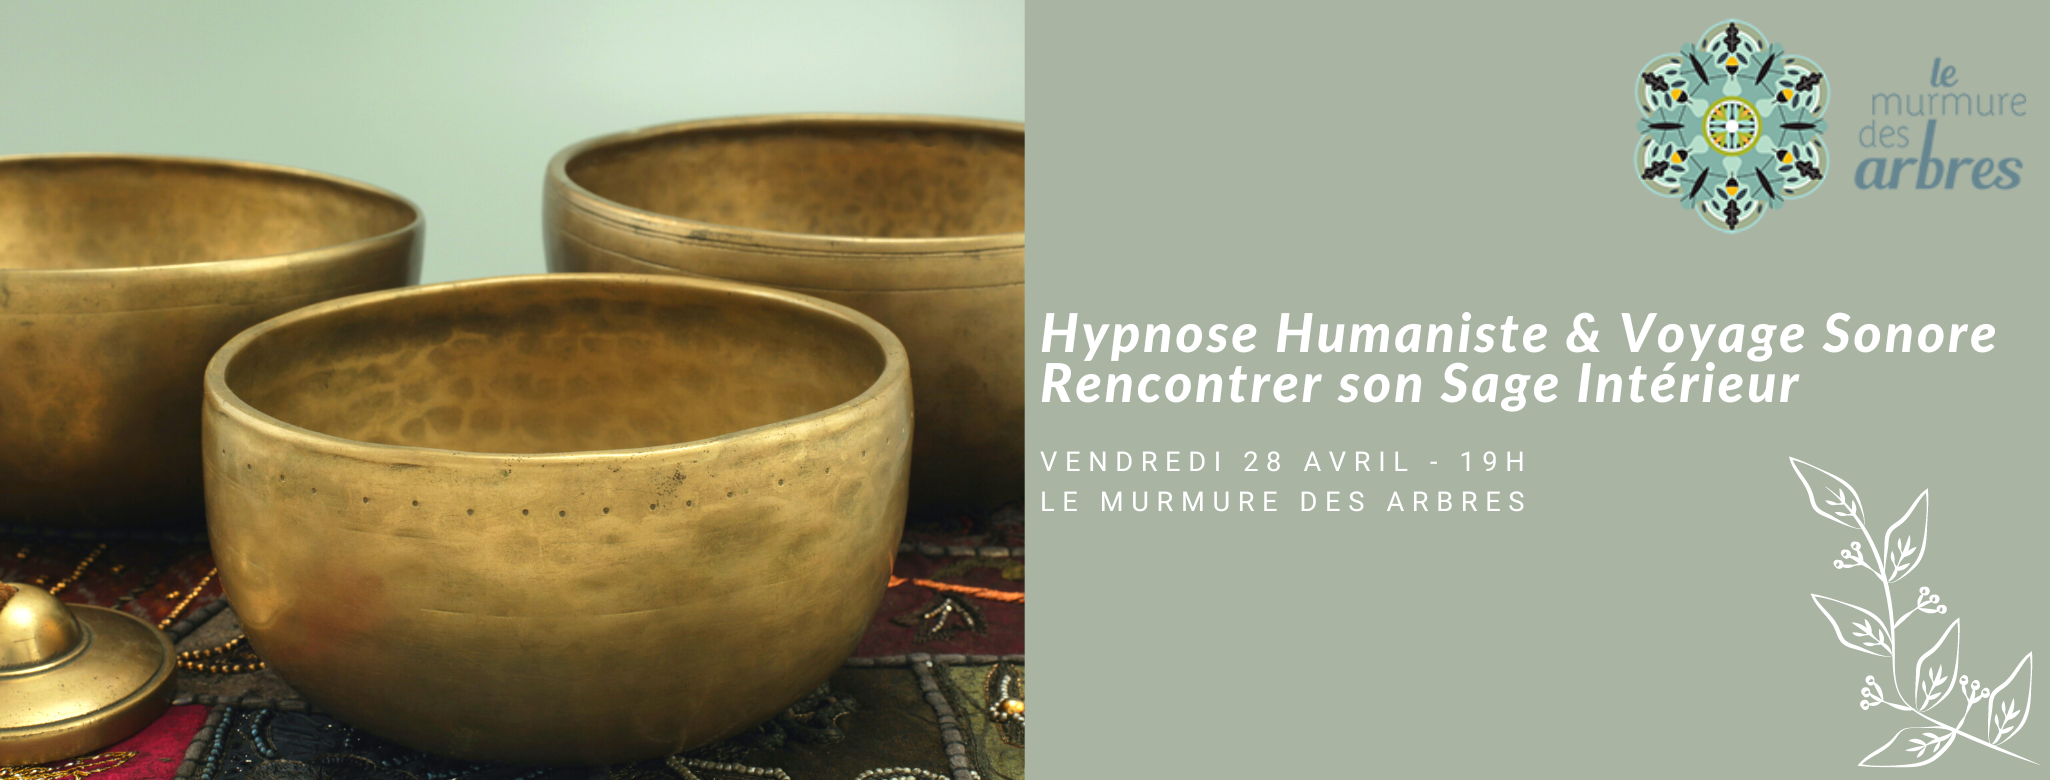 Hypnose Humaniste & Voyage Sonore